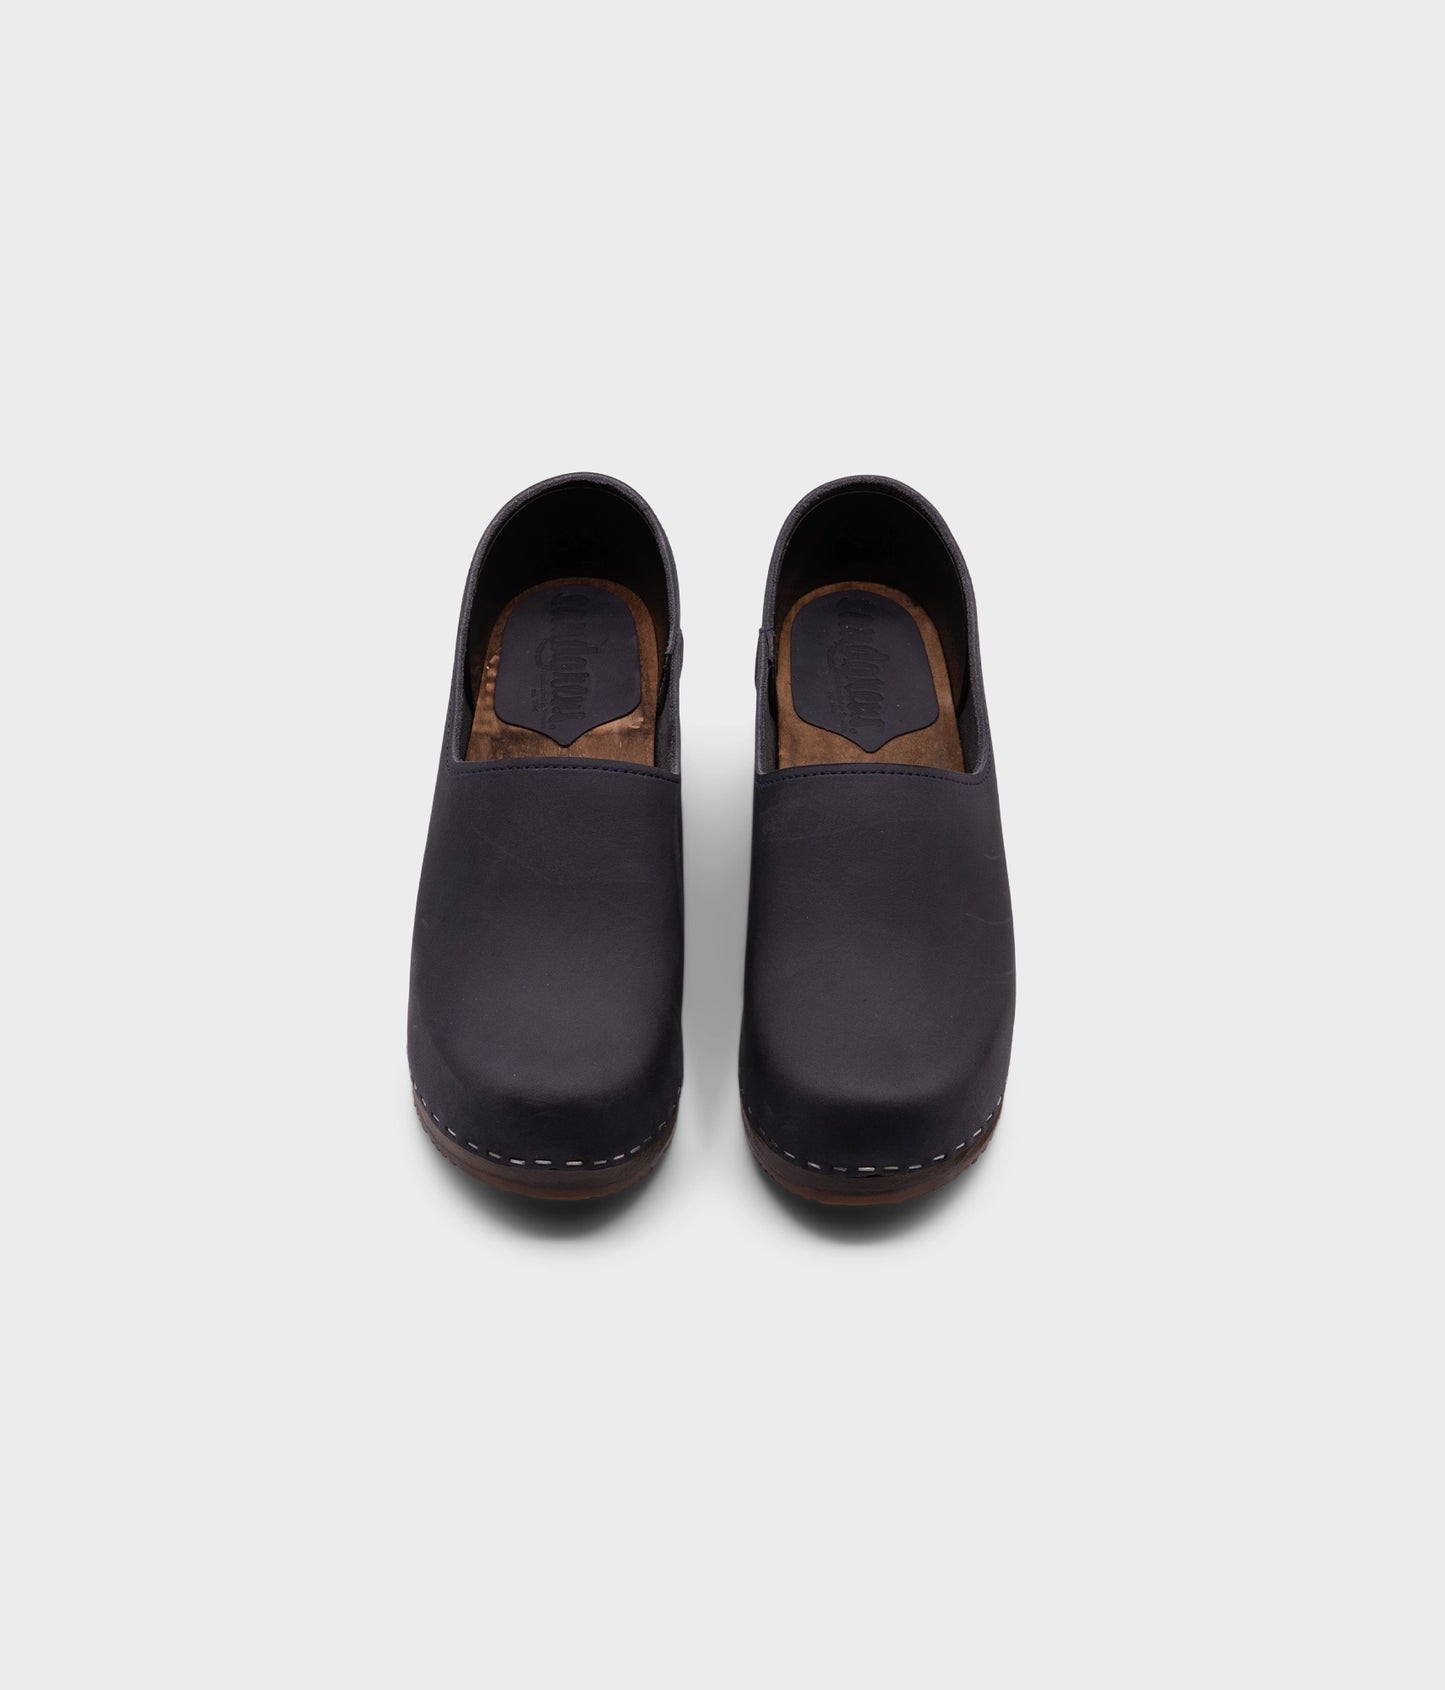 high heeled closed-back clogs in navy blue nubuck leather stapled on a dark wooden base